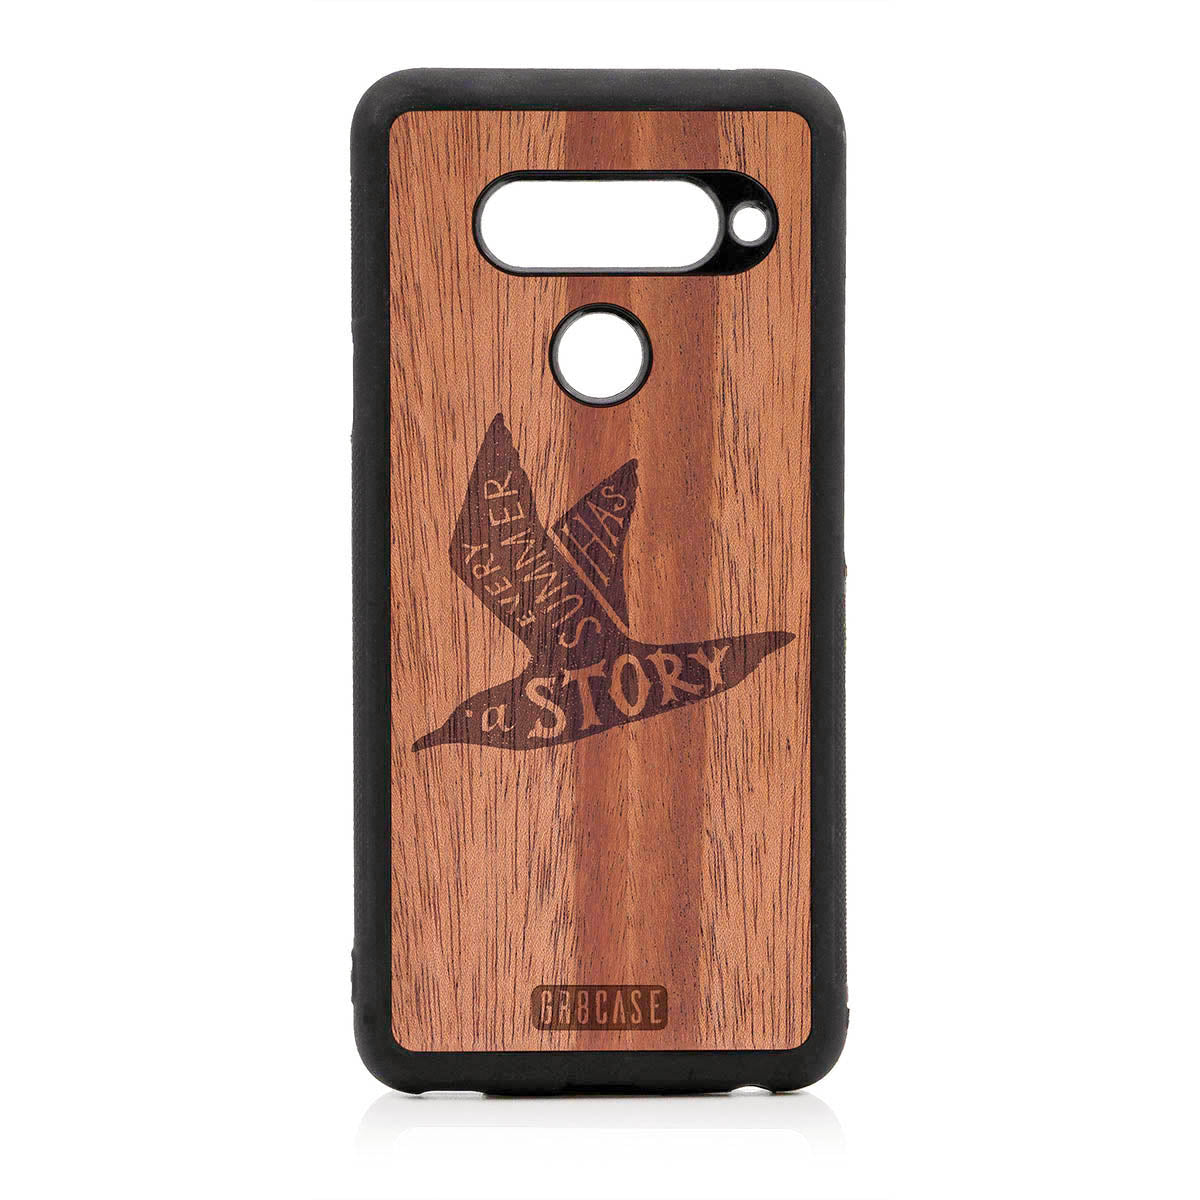 Every Summer Has A Story (Seagull) Design Wood Case For LG V40